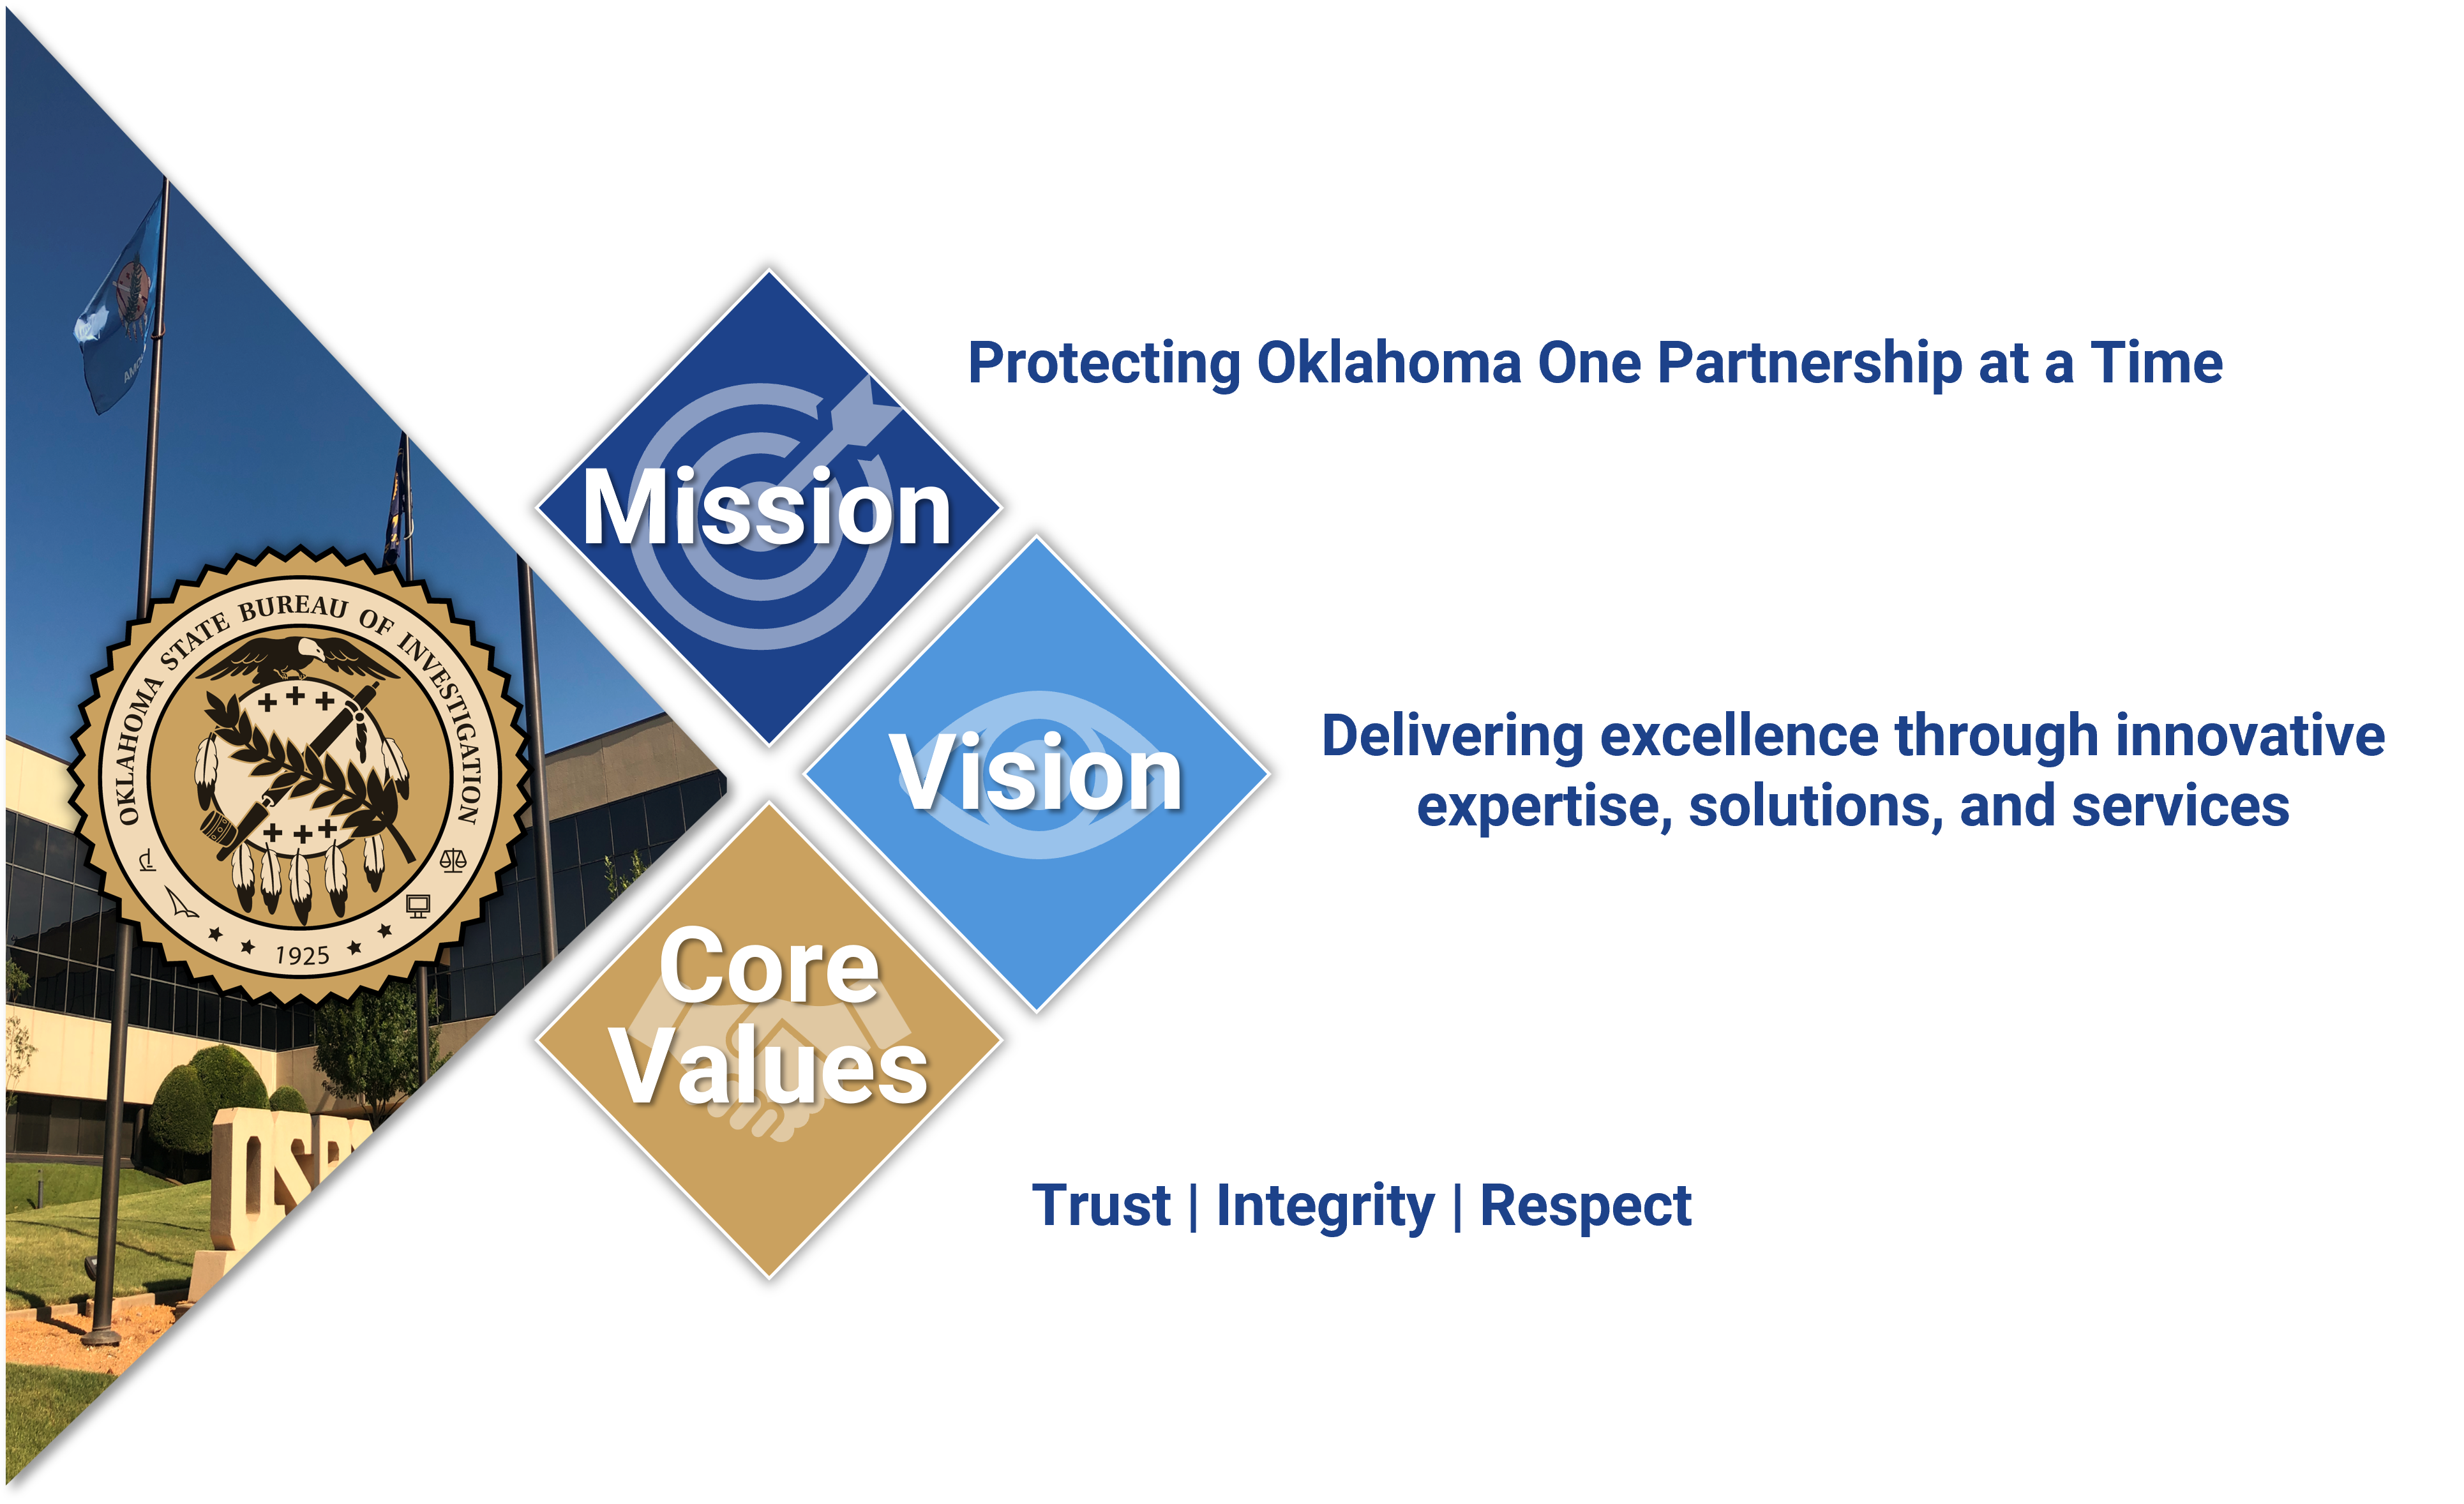 osbi mission- protecting oklahoma one partnership at a time, vision-delivering excellence through innovative expertise, solutions, and services. core values - turst, integrity and respect